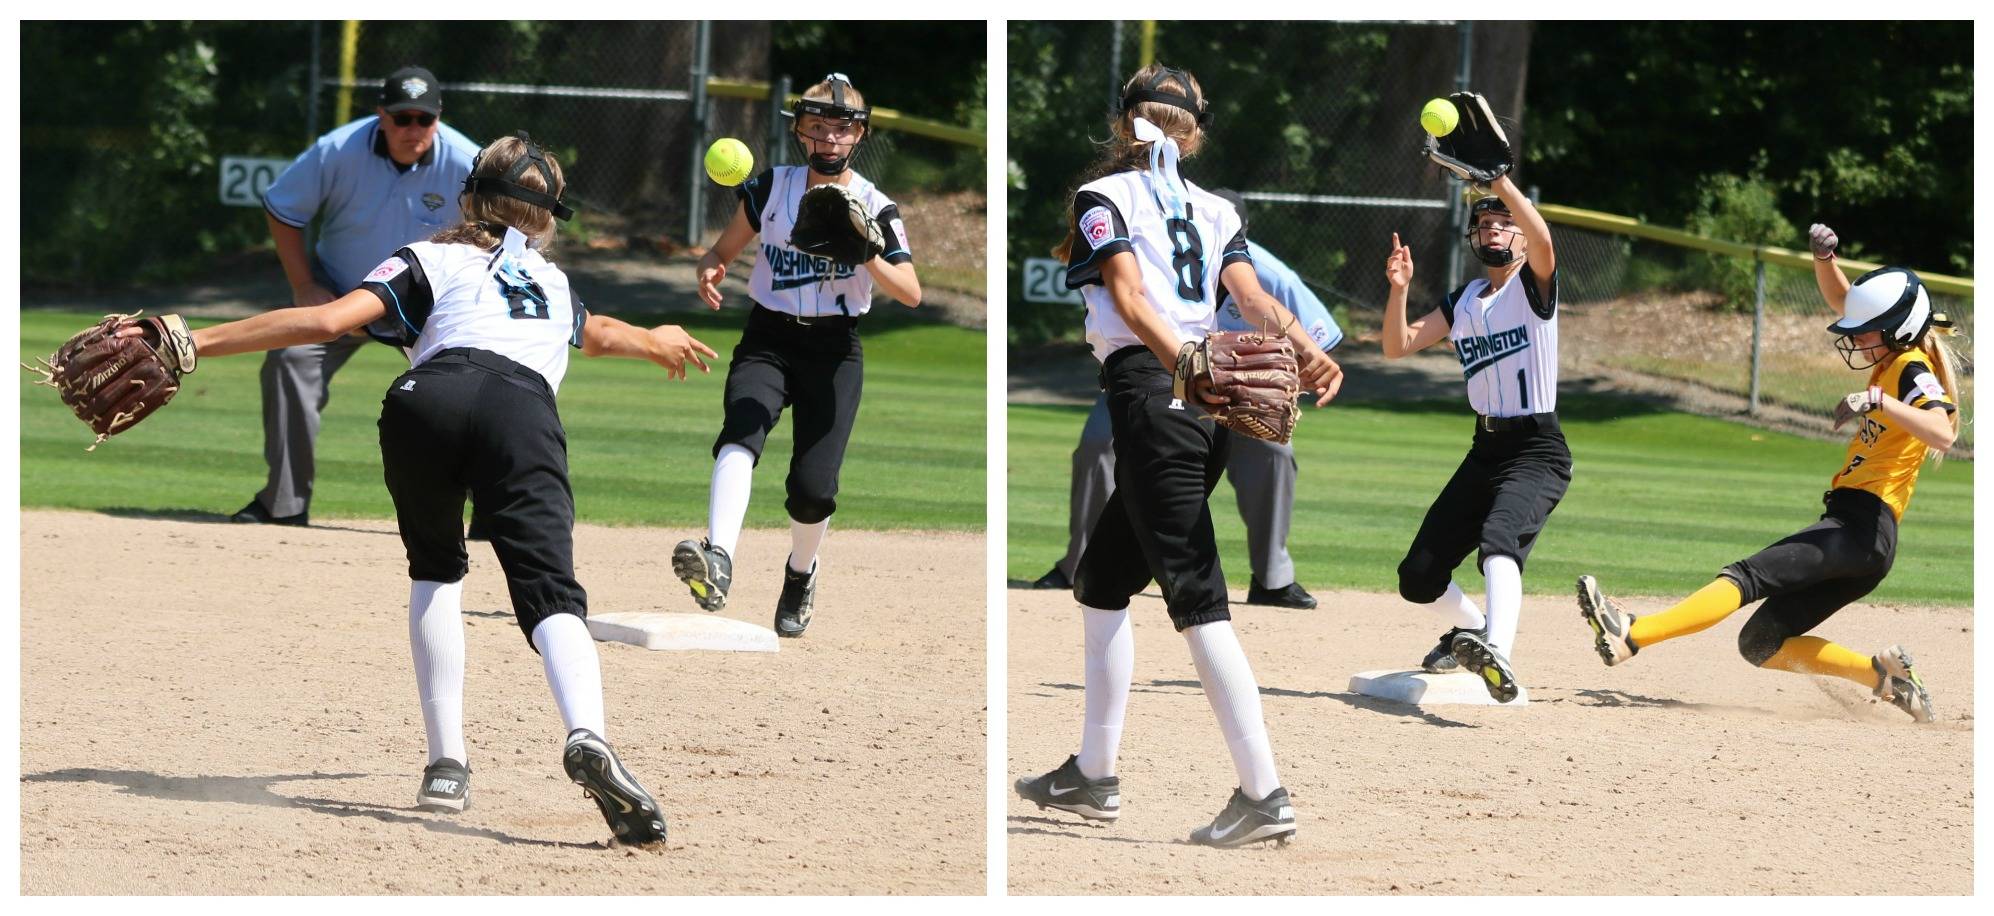 Karli Kostoff, left, tosses the ball to Sundis Cole for a force out.